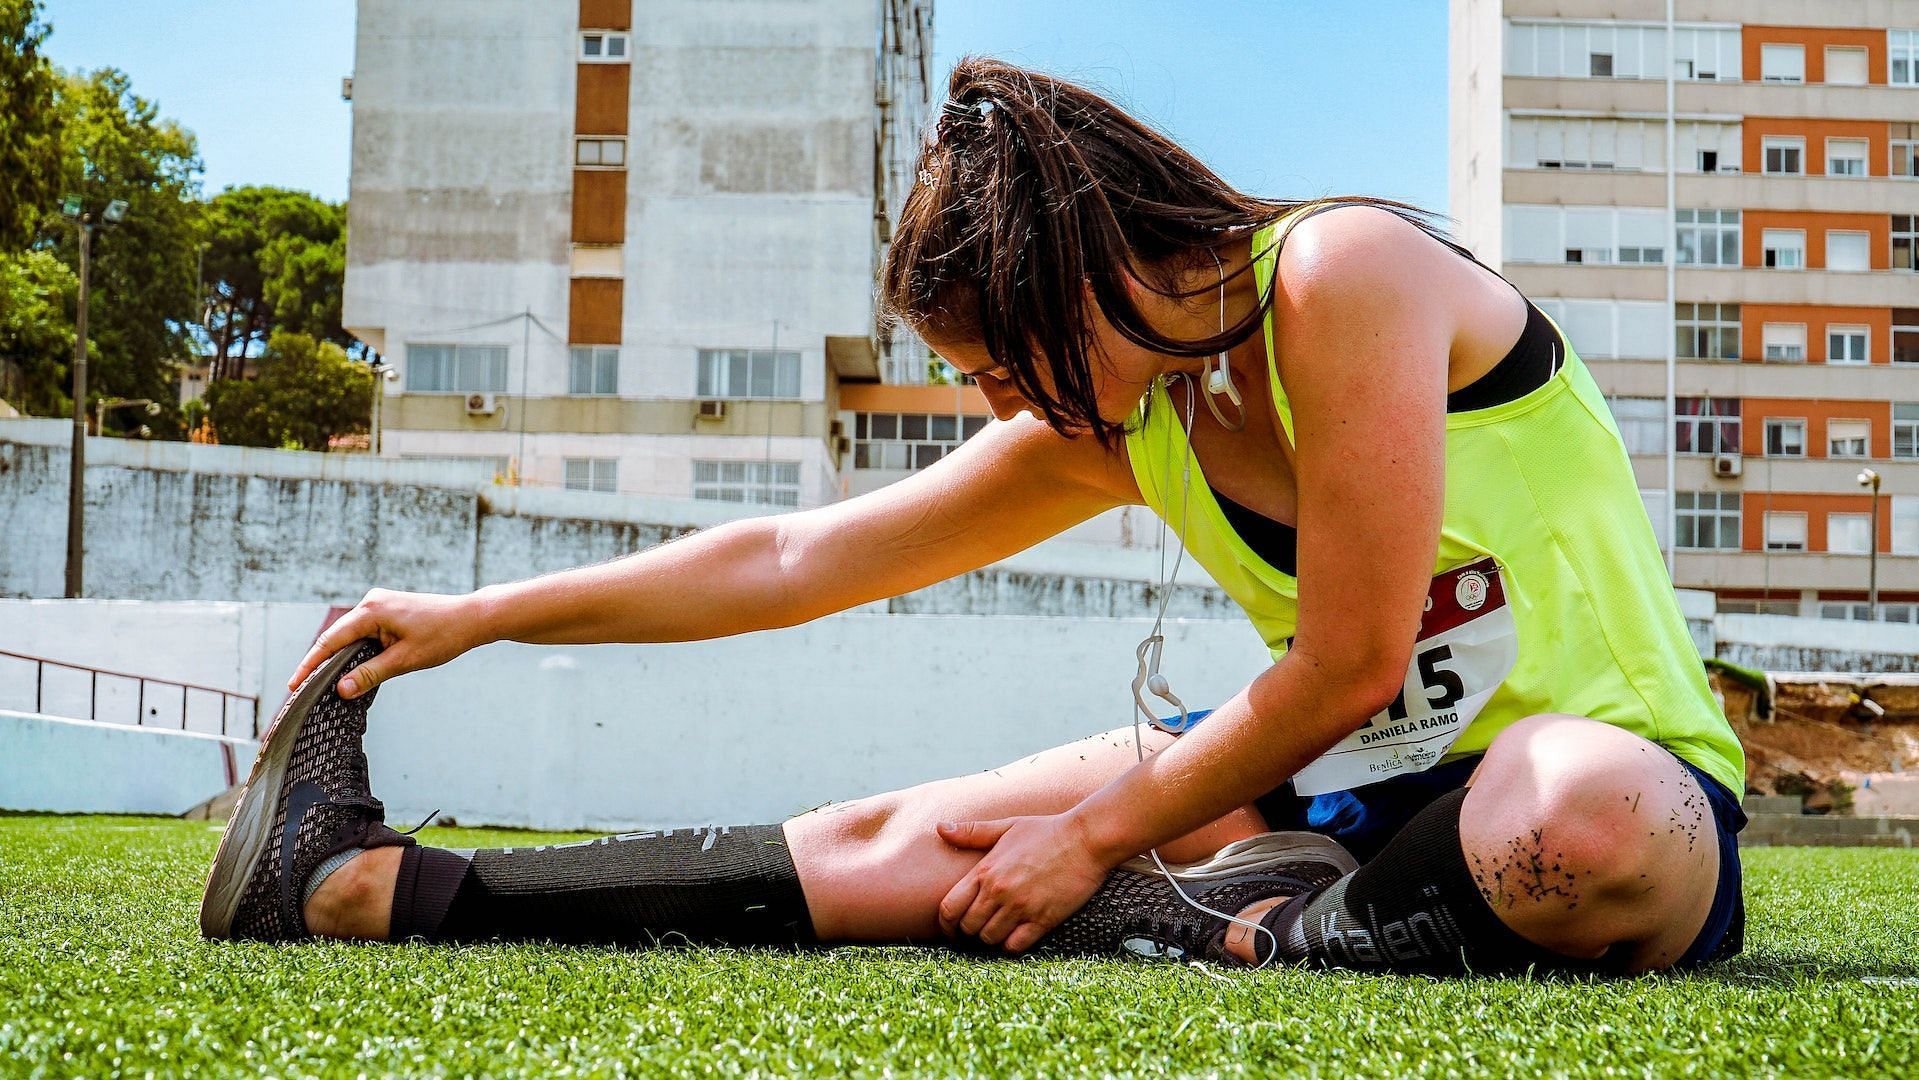 Stretching exercises after a run is important. (Photo via Pexels/RUN 4 FFWPU)